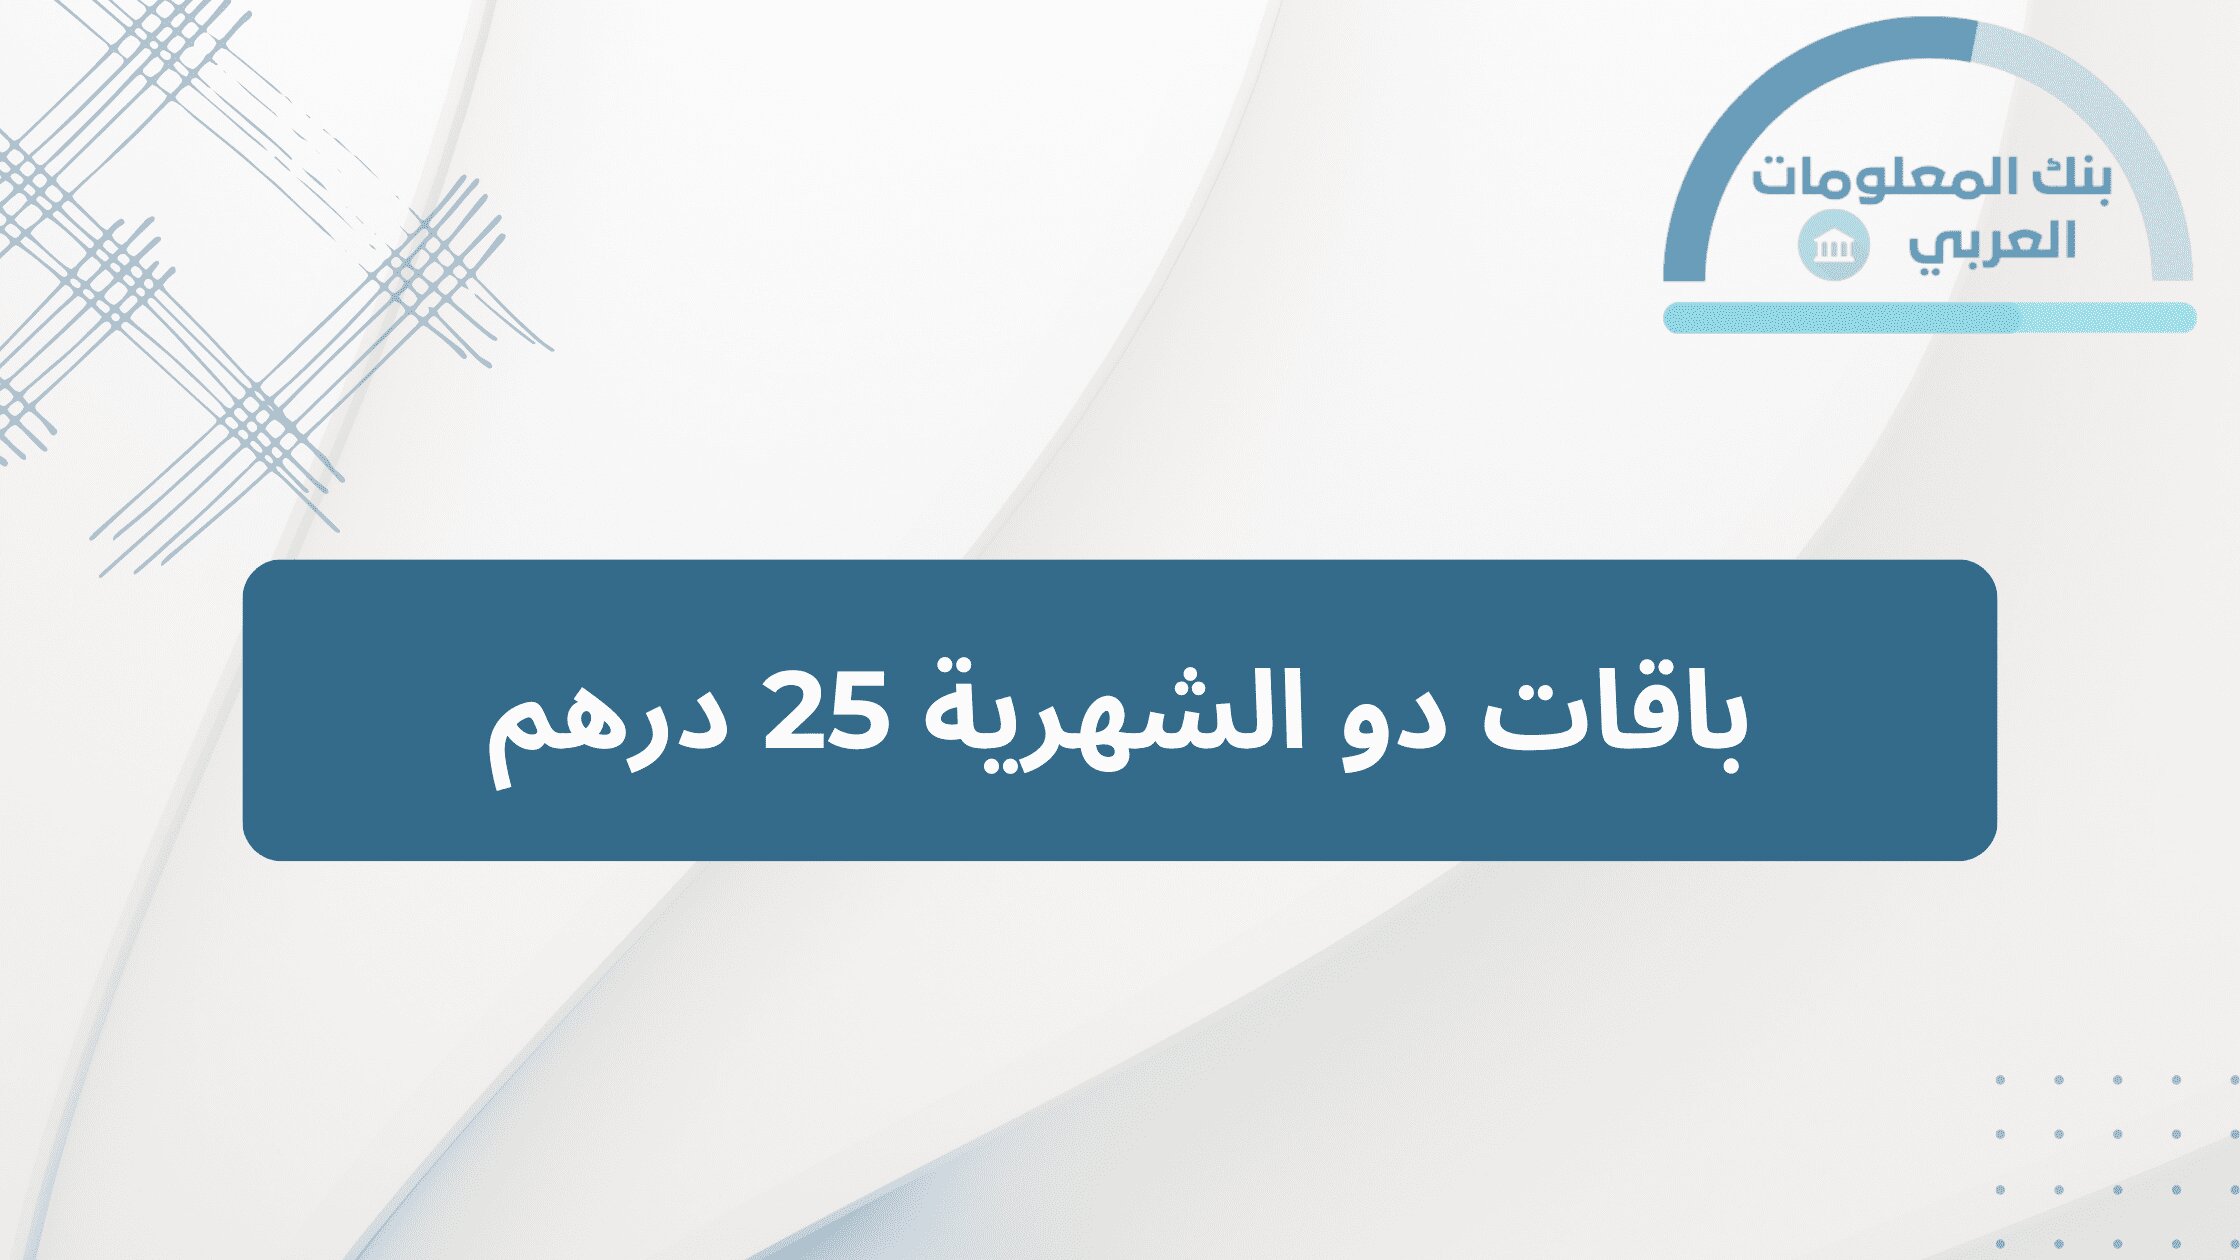 Read more about the article باقات دو الشهرية 25 درهم